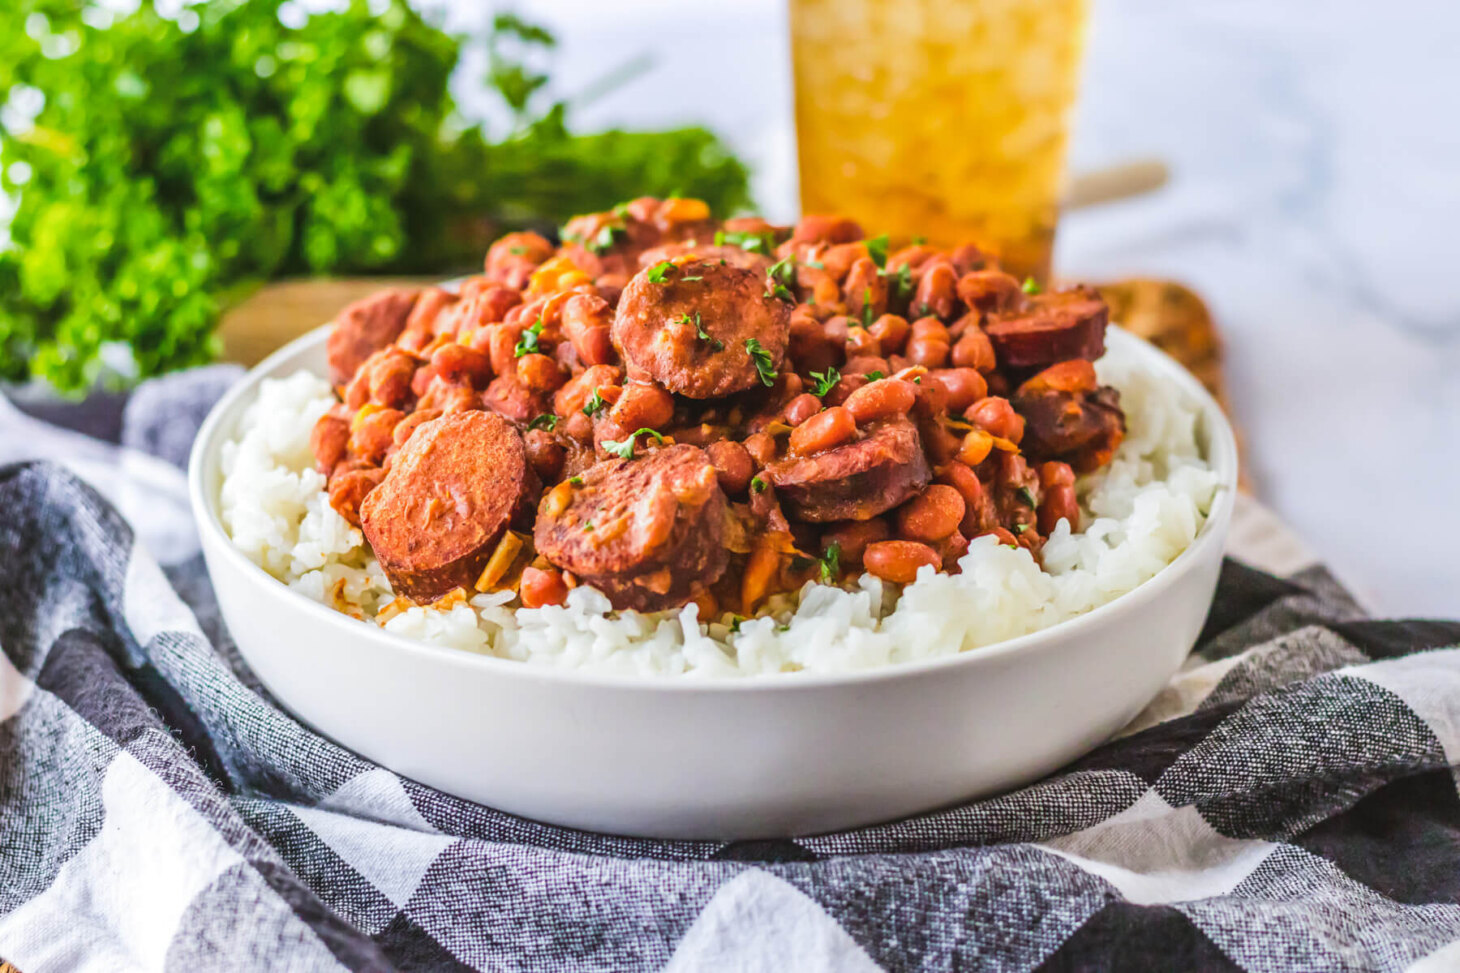 A plate full of hearty and saucy red beans and rice with rounds of andouille sausage.